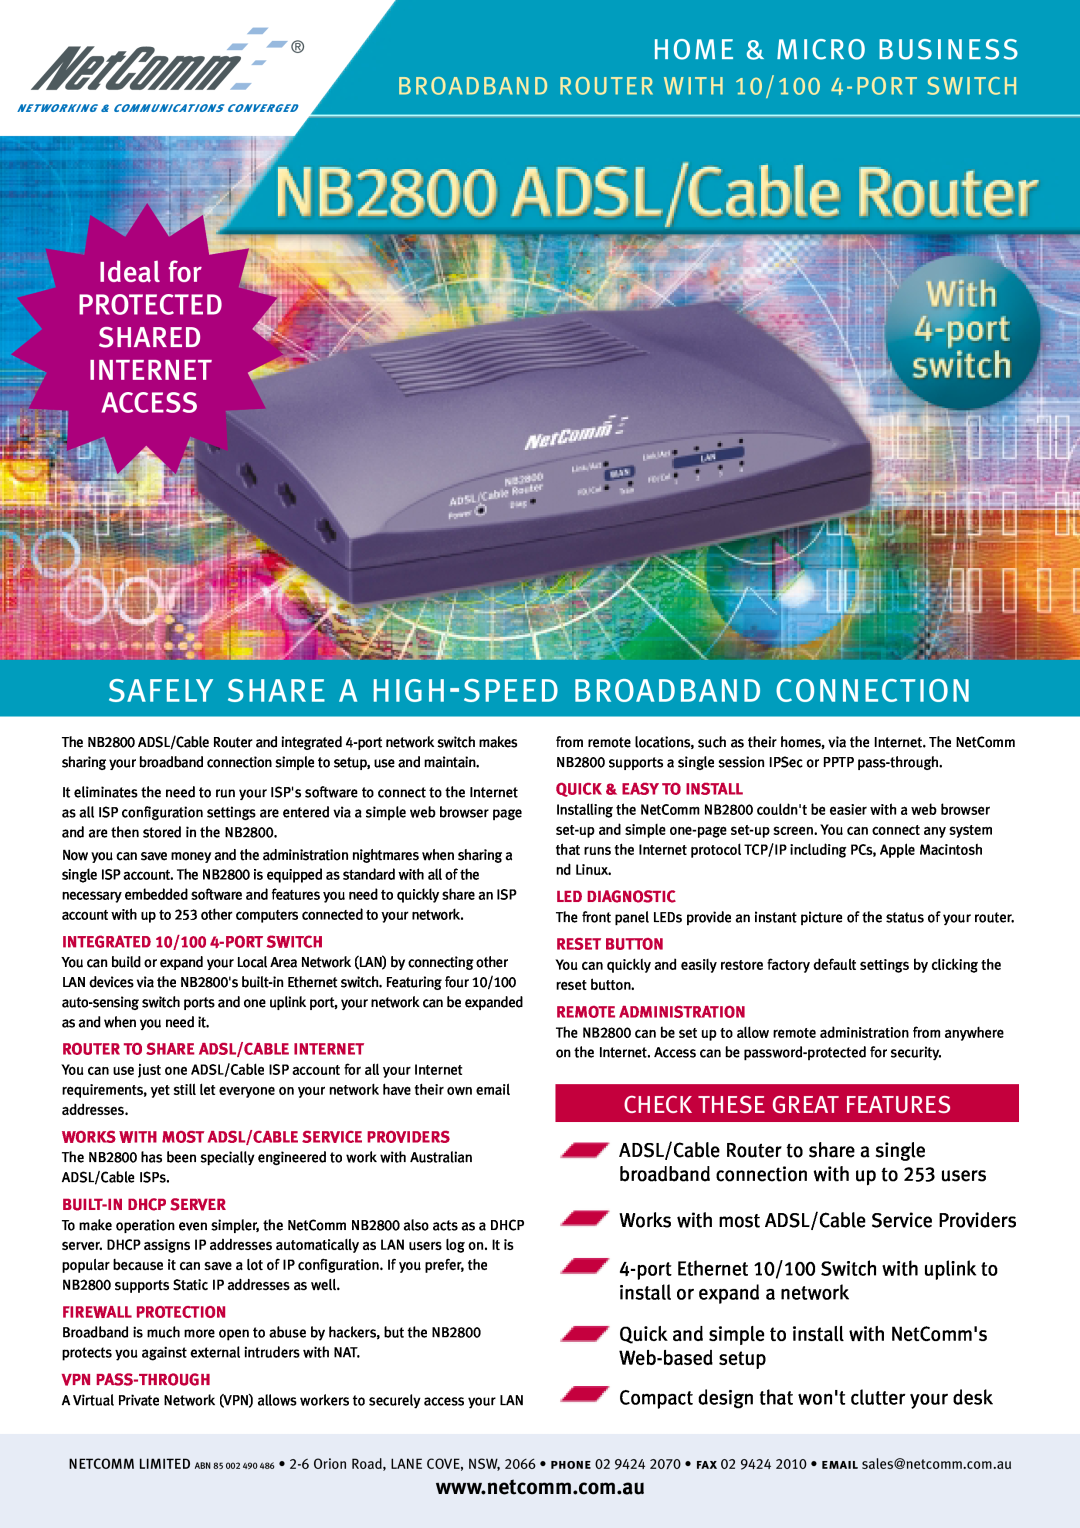 NetComm NB2800 manual Home & Micro Business, Ideal for PROTECTED SHARED INTERNET ACCESS, Check These Great Features 